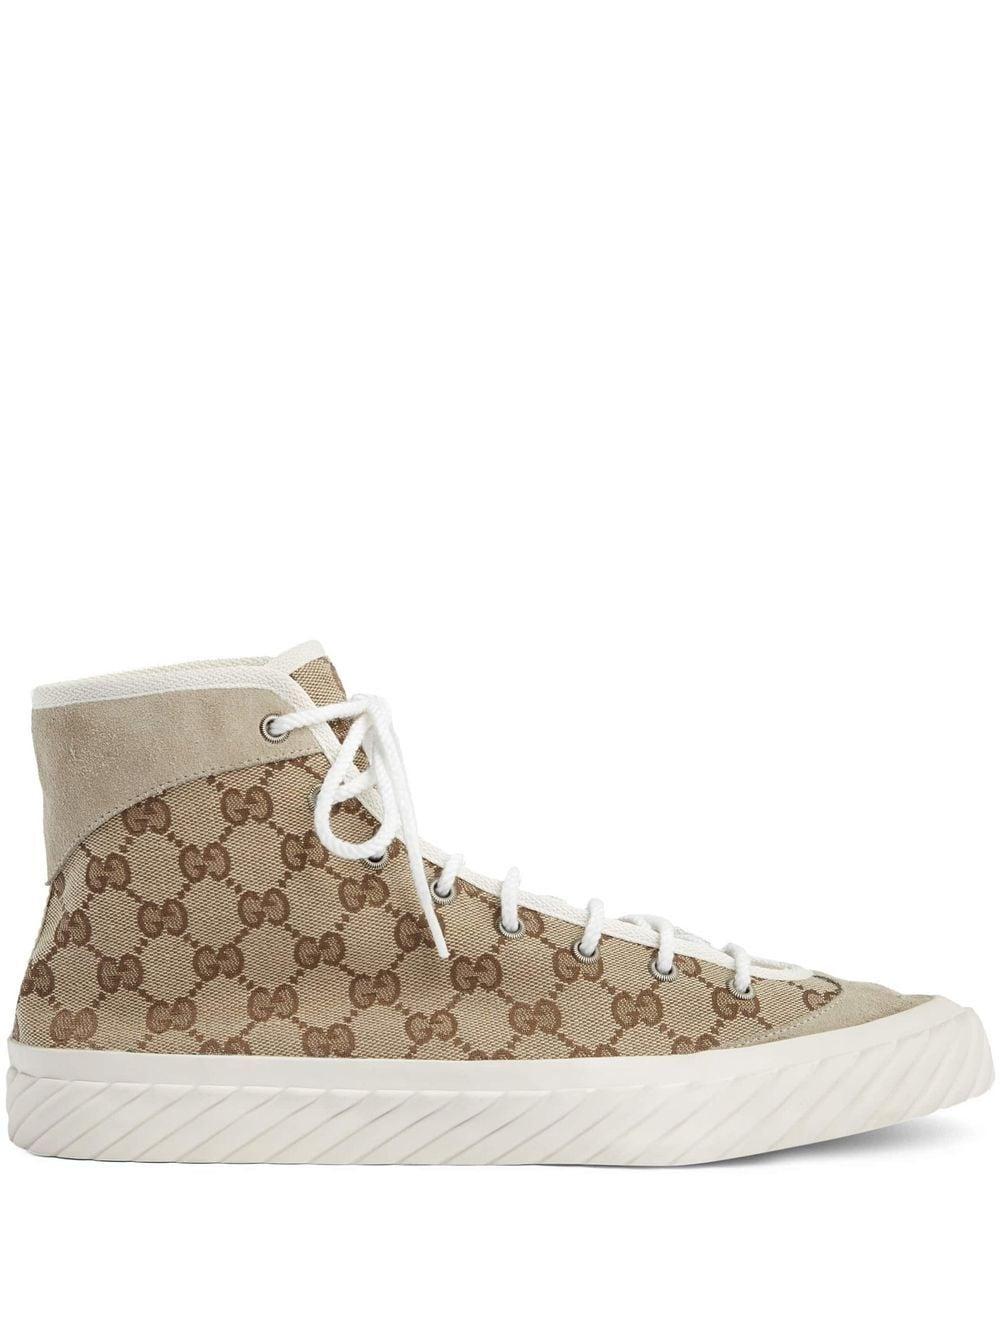 Gucci GG Monogram High-top Sneakers in Natural for Men | Lyst